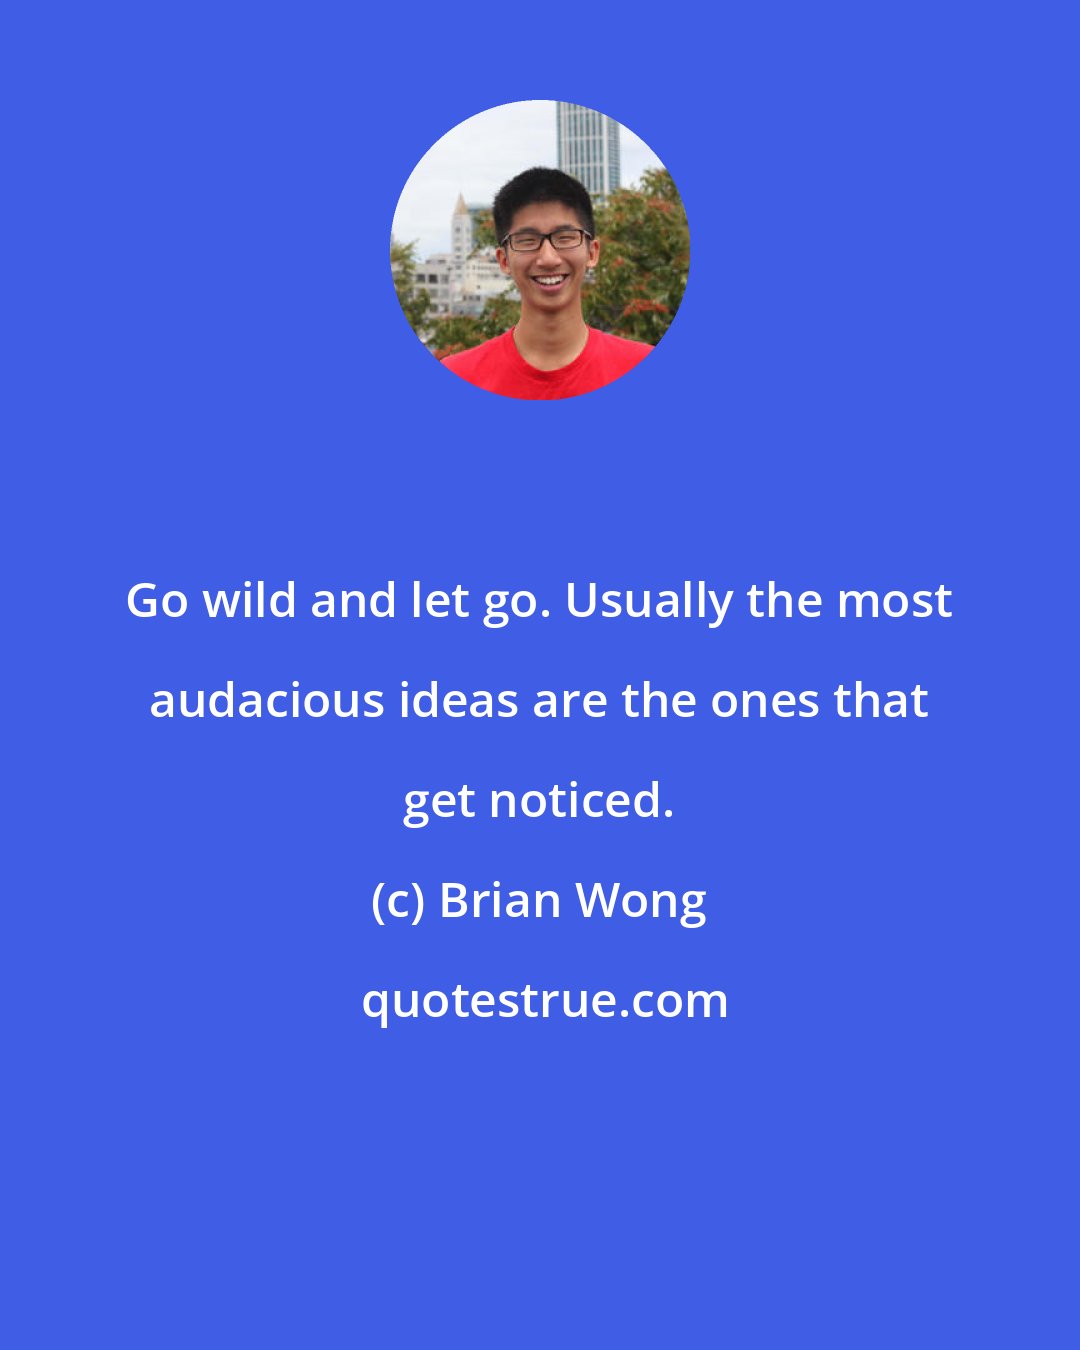 Brian Wong: Go wild and let go. Usually the most audacious ideas are the ones that get noticed.